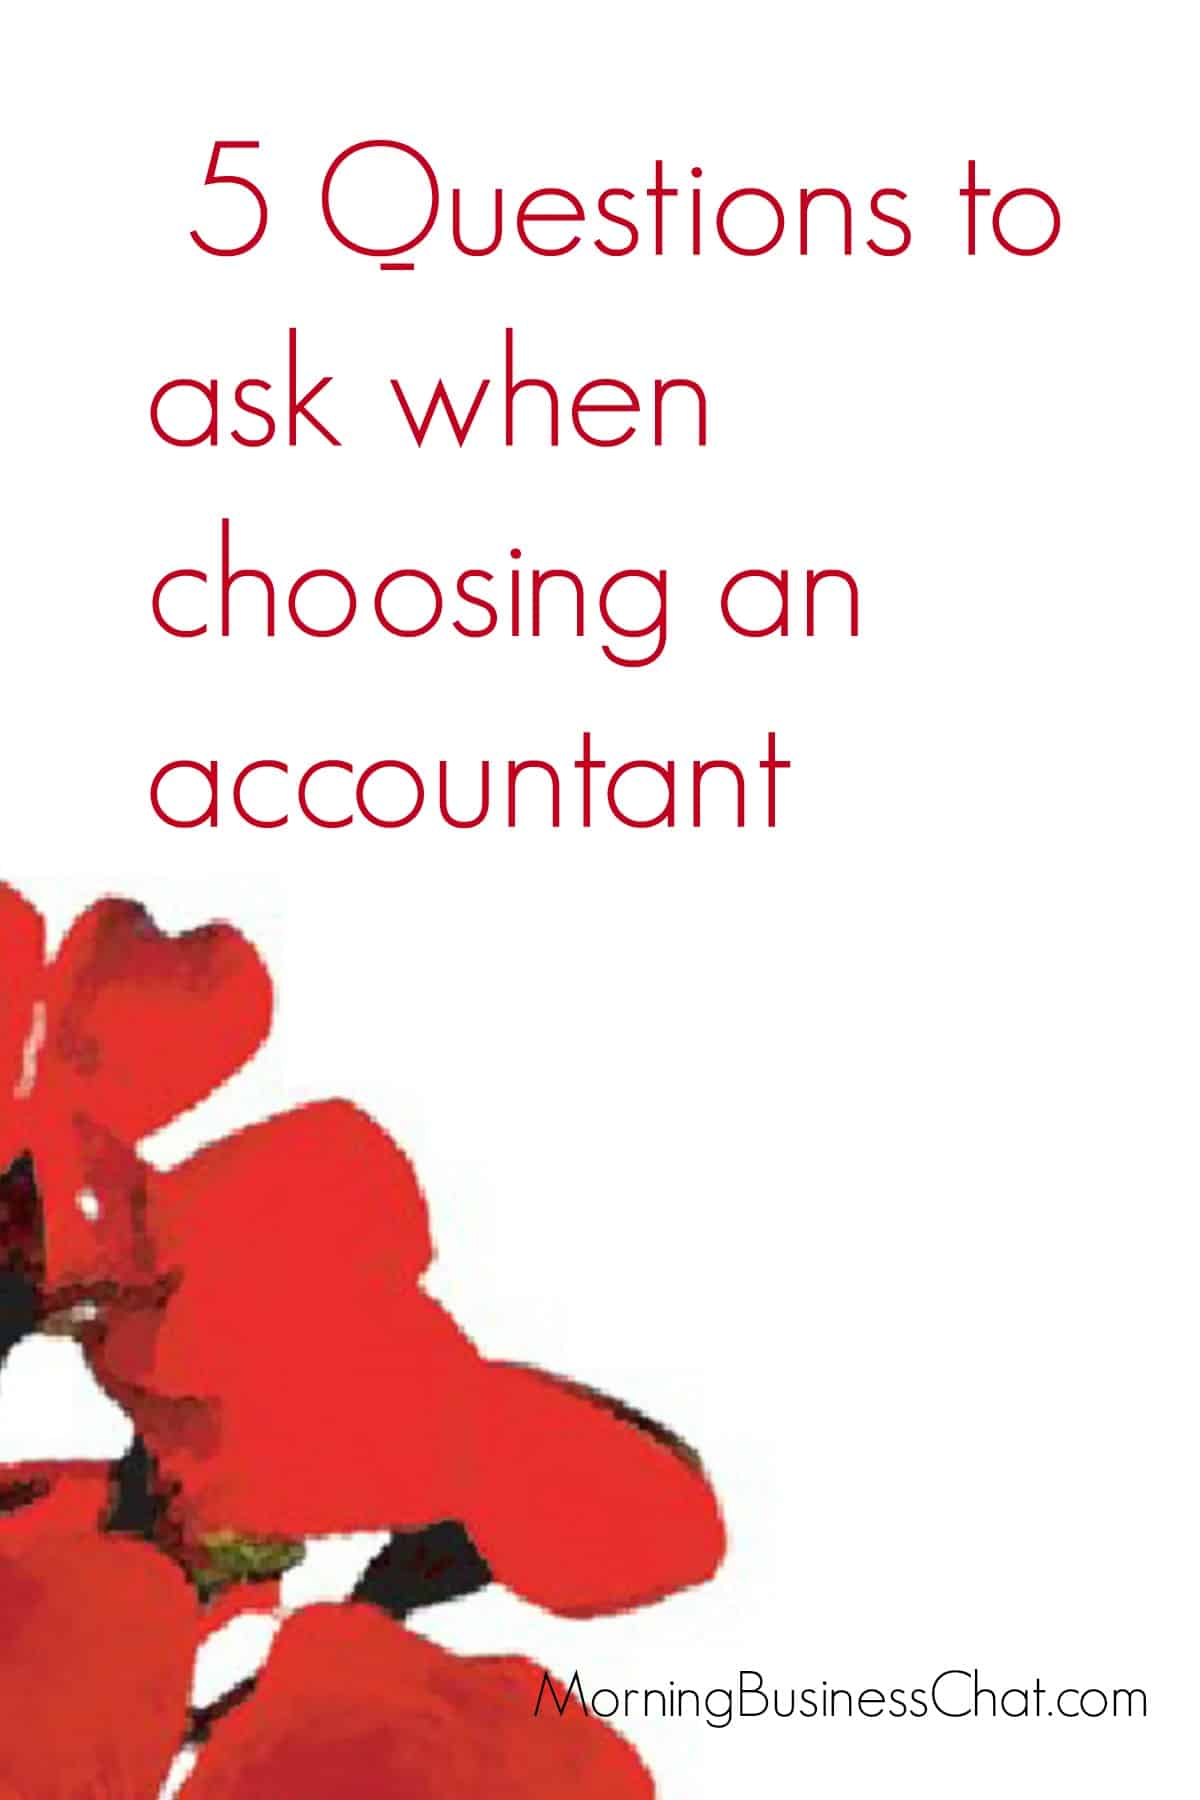 Questions to ask when choosing an accountant - Guest posts from Red Geranium Accountancy services.